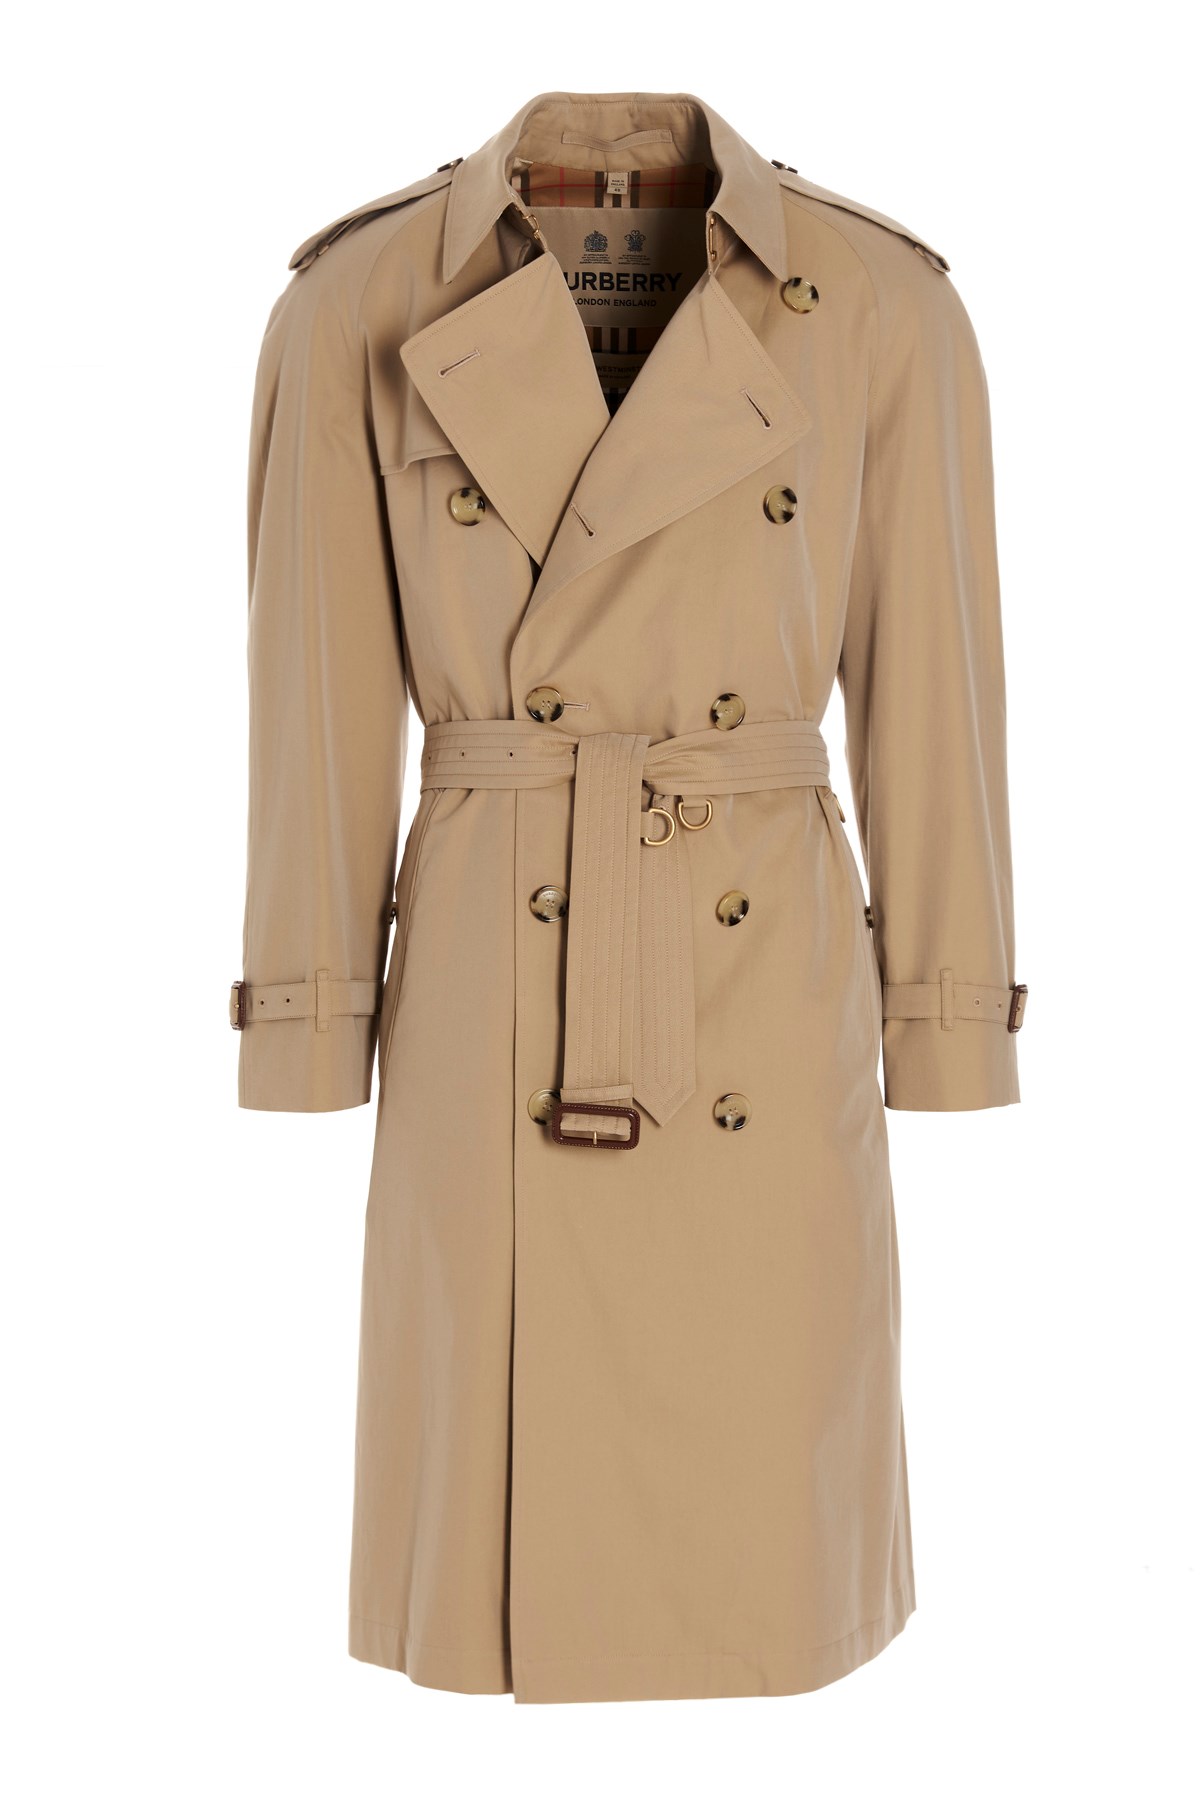 BURBERRY 'Westminster’ Trench Coat